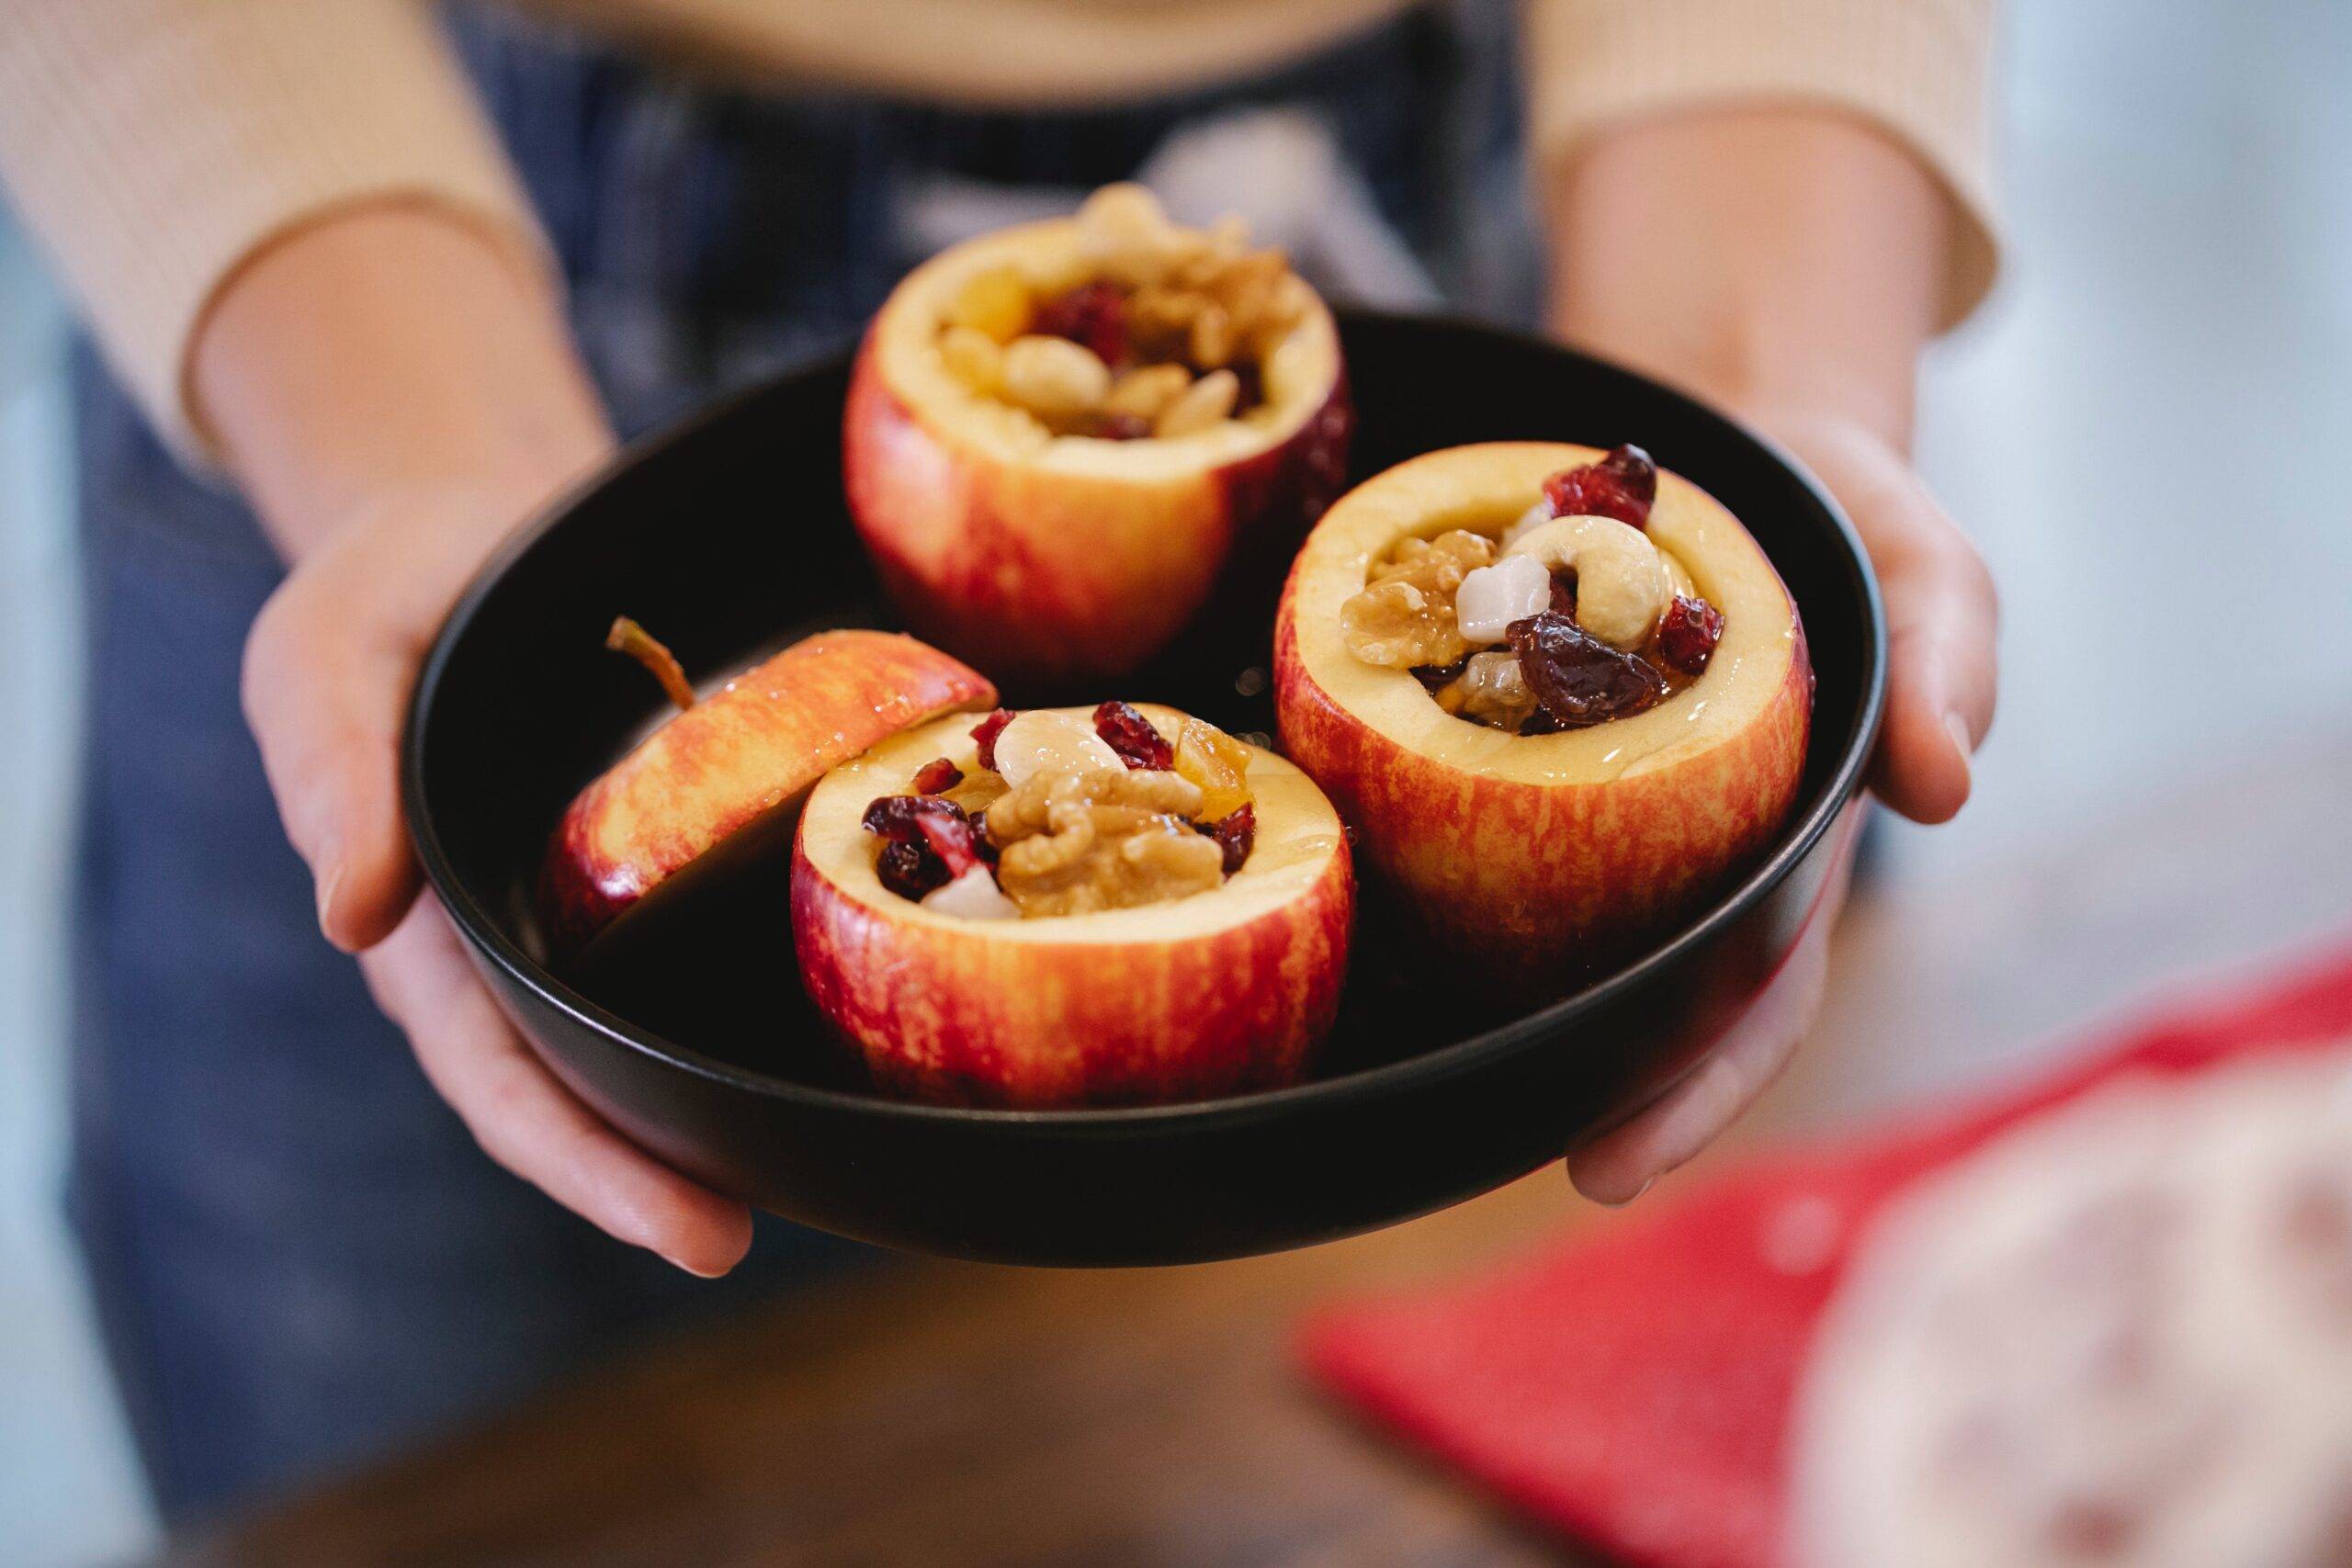 Baked Apple with Cinnamon and Walnuts